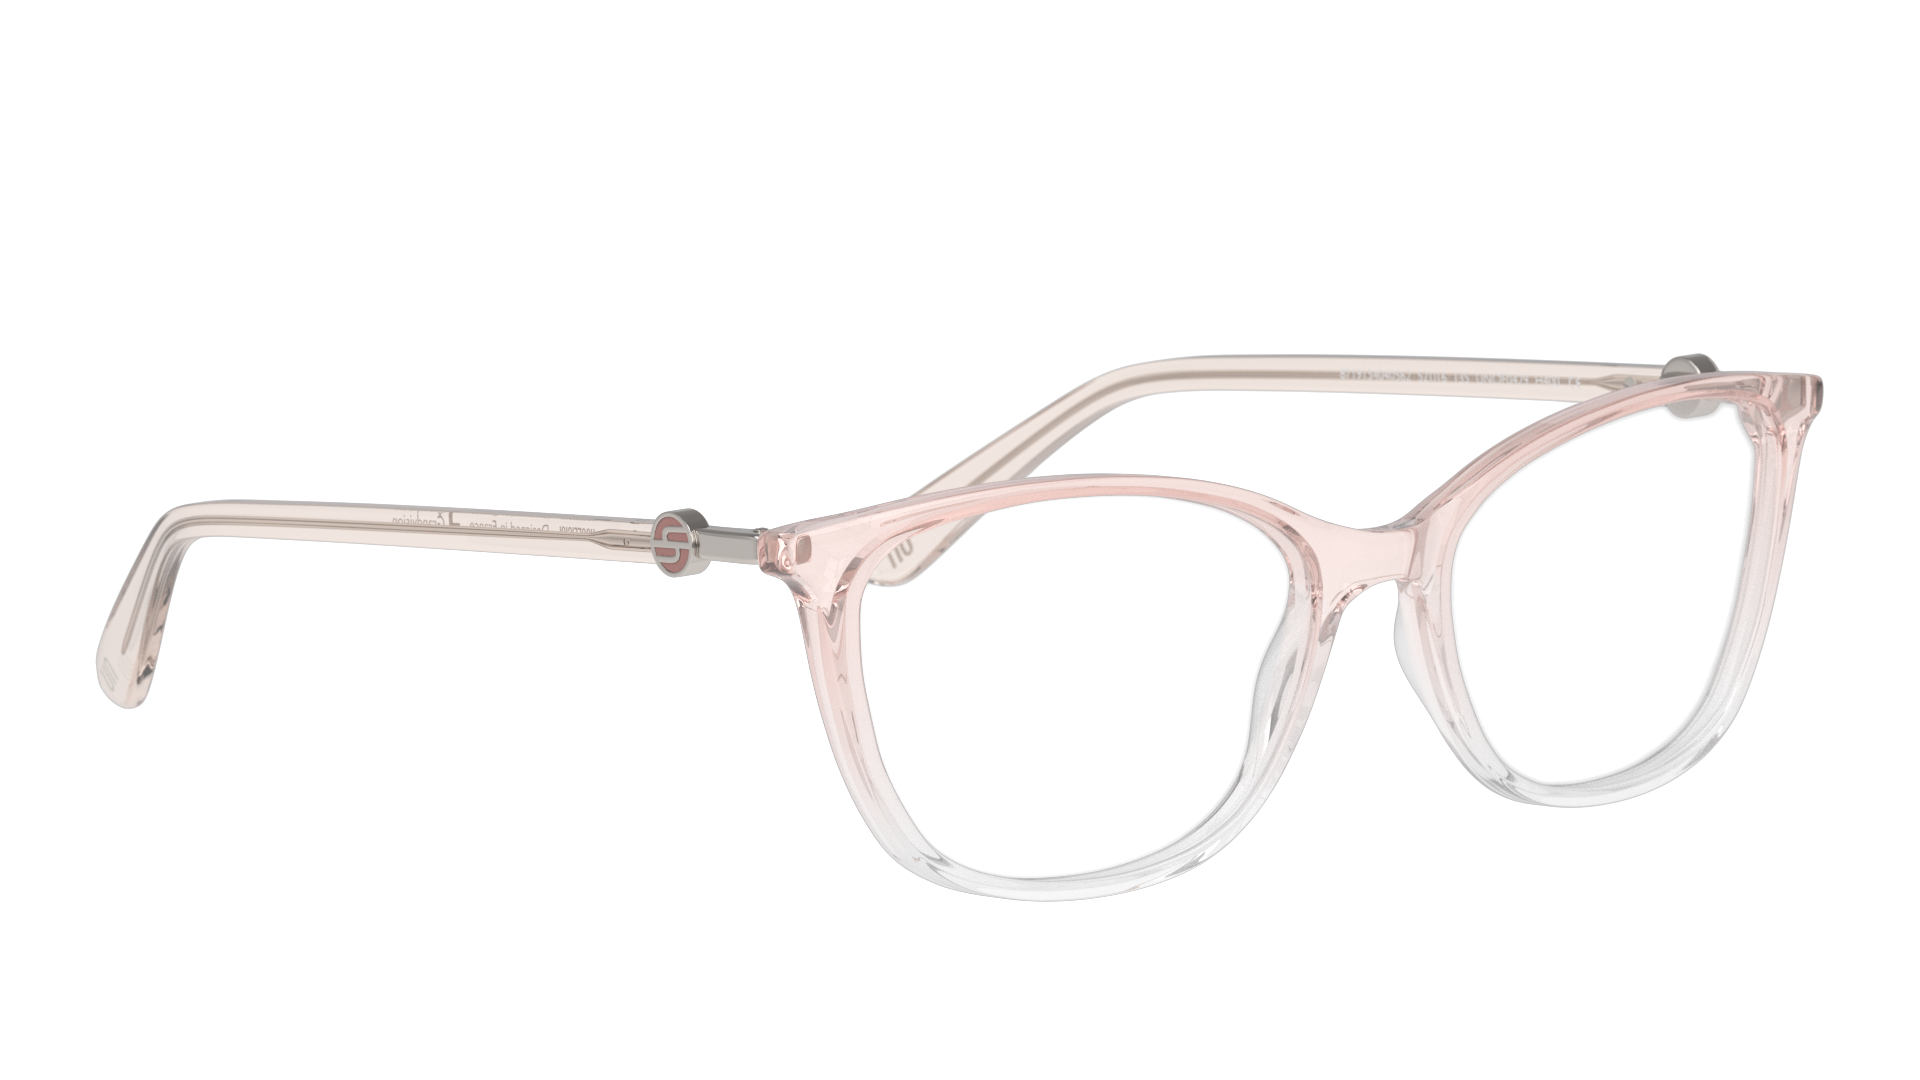 Angle_Right01 Unofficial UNOF0429 Glasses Transparent / Transparent, Pink